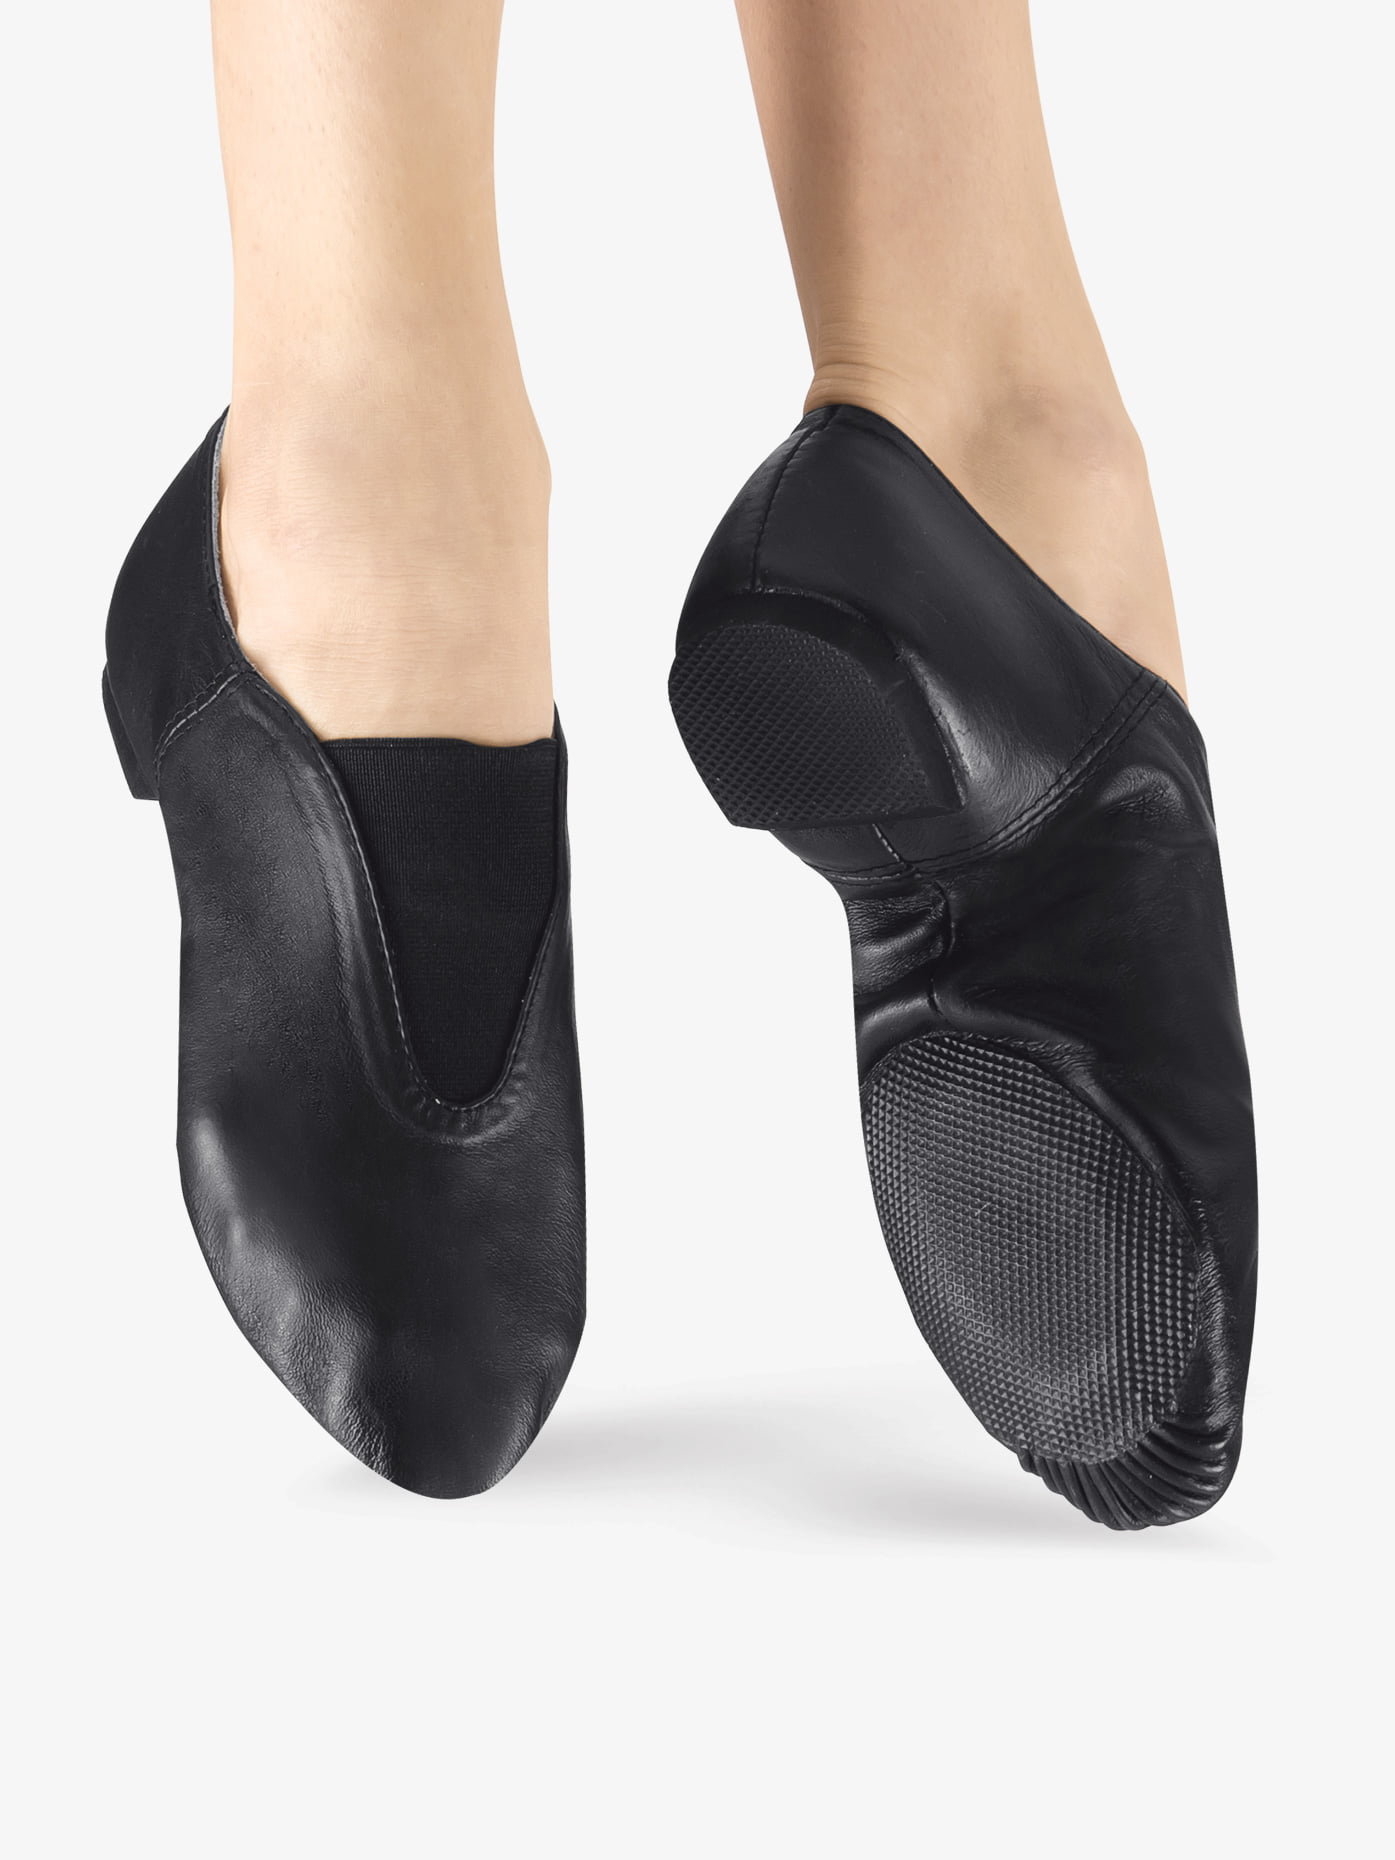 s.lemon Jazz Dance Shoe Slip On/Lace Up Modern Jazz Shoes for Kids & Adult,Made of Genuine Leather